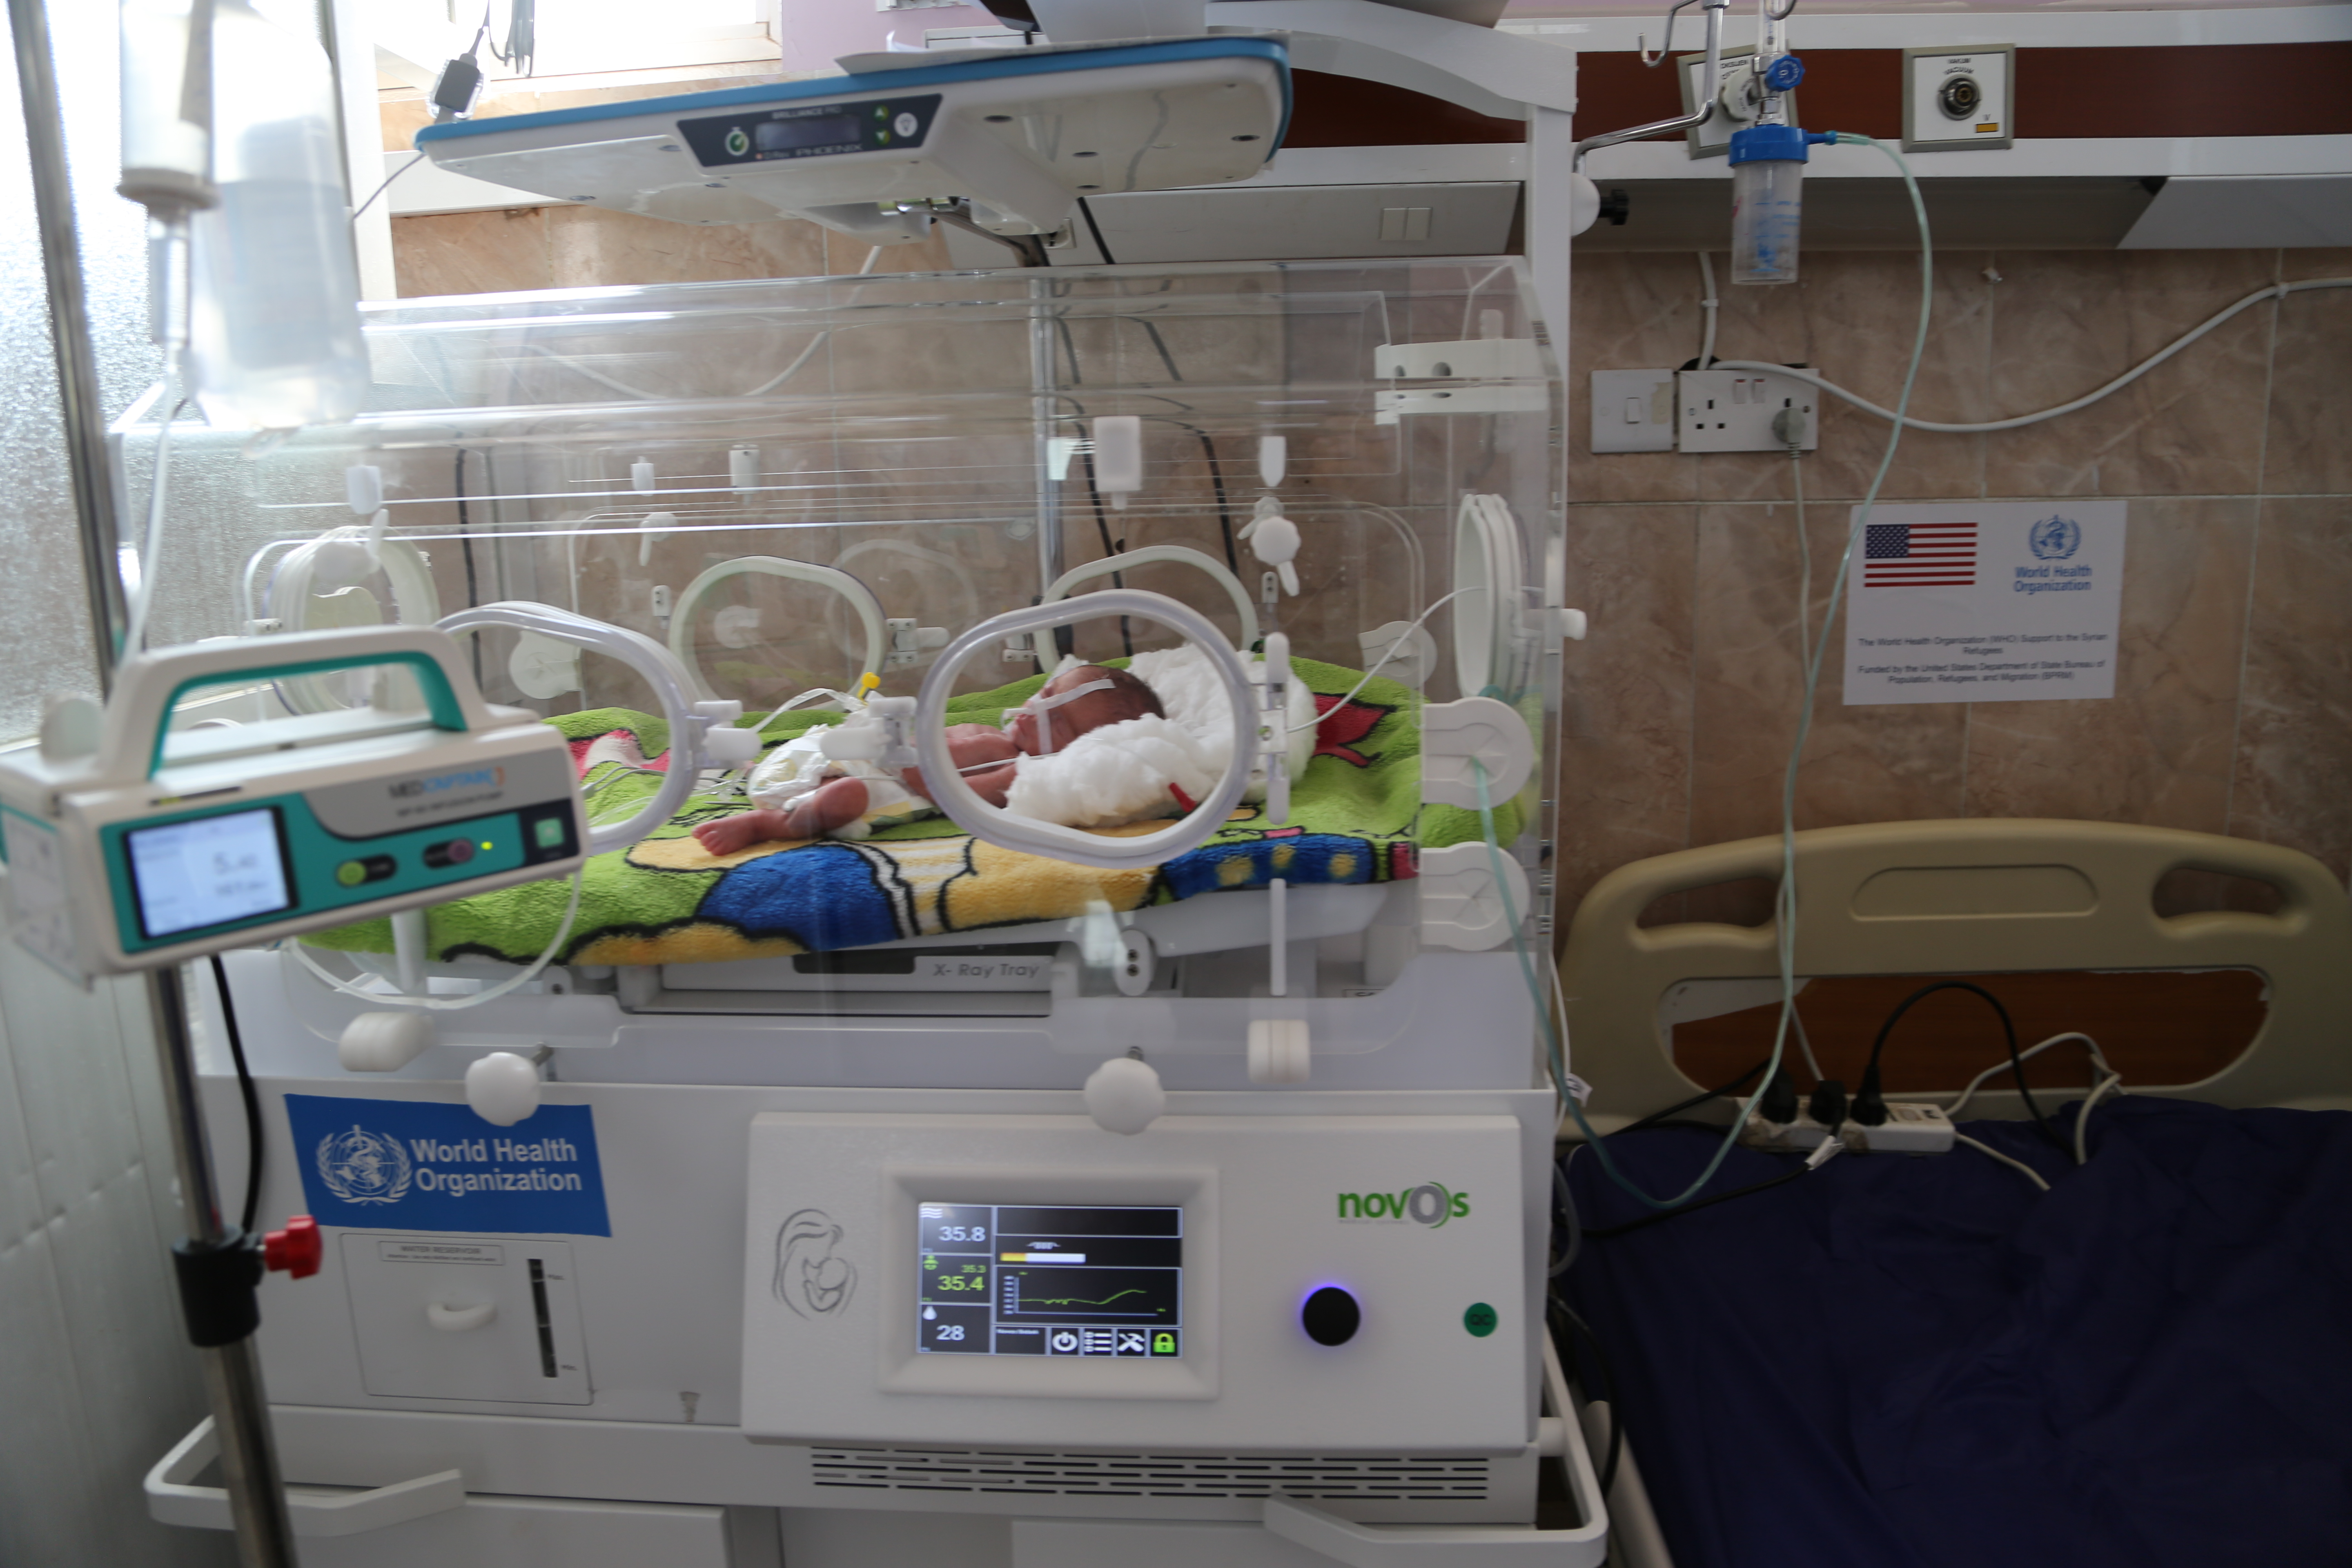 WHO support to paediatric and neonatal semi-intensive care units in Raparin Paediatric Hospital in Erbil